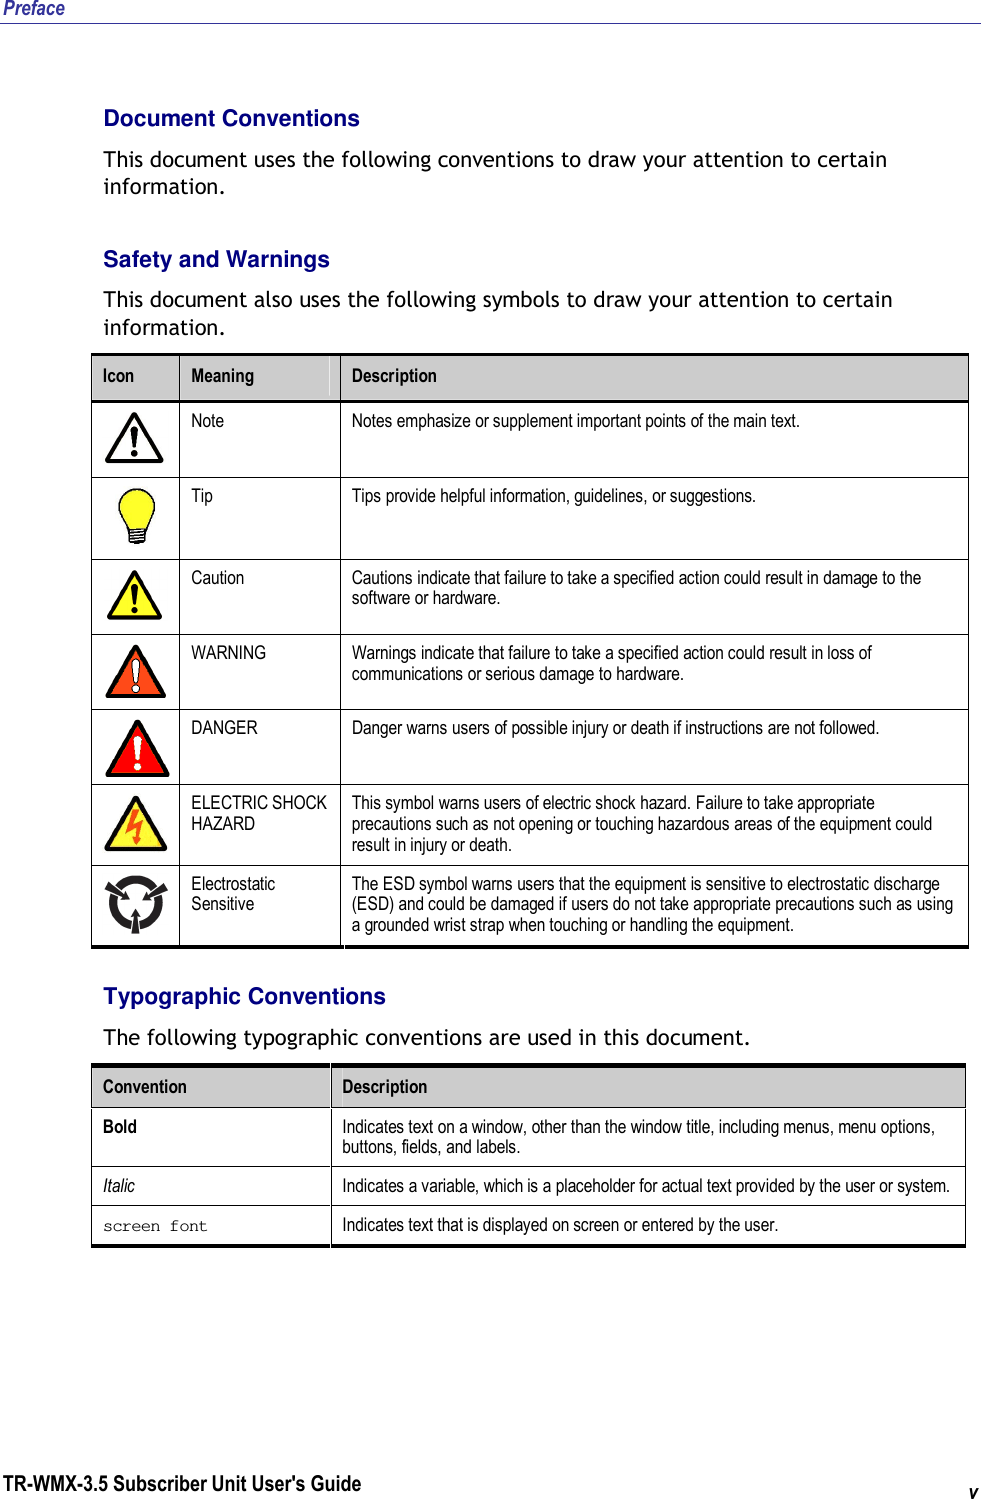 Preface TR-WMX-3.5 Subscriber Unit User&apos;s Guide v Document Conventions This document uses the following conventions to draw your attention to certain information. Safety and Warnings This document also uses the following symbols to draw your attention to certain information. Icon  Meaning  Description  Note  Notes emphasize or supplement important points of the main text.  Tip  Tips provide helpful information, guidelines, or suggestions.  Caution  Cautions indicate that failure to take a specified action could result in damage to the software or hardware.  WARNING  Warnings indicate that failure to take a specified action could result in loss of communications or serious damage to hardware.  DANGER  Danger warns users of possible injury or death if instructions are not followed.  ELECTRIC SHOCK HAZARD This symbol warns users of electric shock hazard. Failure to take appropriate precautions such as not opening or touching hazardous areas of the equipment could result in injury or death.  Electrostatic Sensitive The ESD symbol warns users that the equipment is sensitive to electrostatic discharge (ESD) and could be damaged if users do not take appropriate precautions such as using a grounded wrist strap when touching or handling the equipment. Typographic Conventions The following typographic conventions are used in this document. Convention  Description Bold  Indicates text on a window, other than the window title, including menus, menu options, buttons, fields, and labels. Italic  Indicates a variable, which is a placeholder for actual text provided by the user or system. screen font  Indicates text that is displayed on screen or entered by the user.  